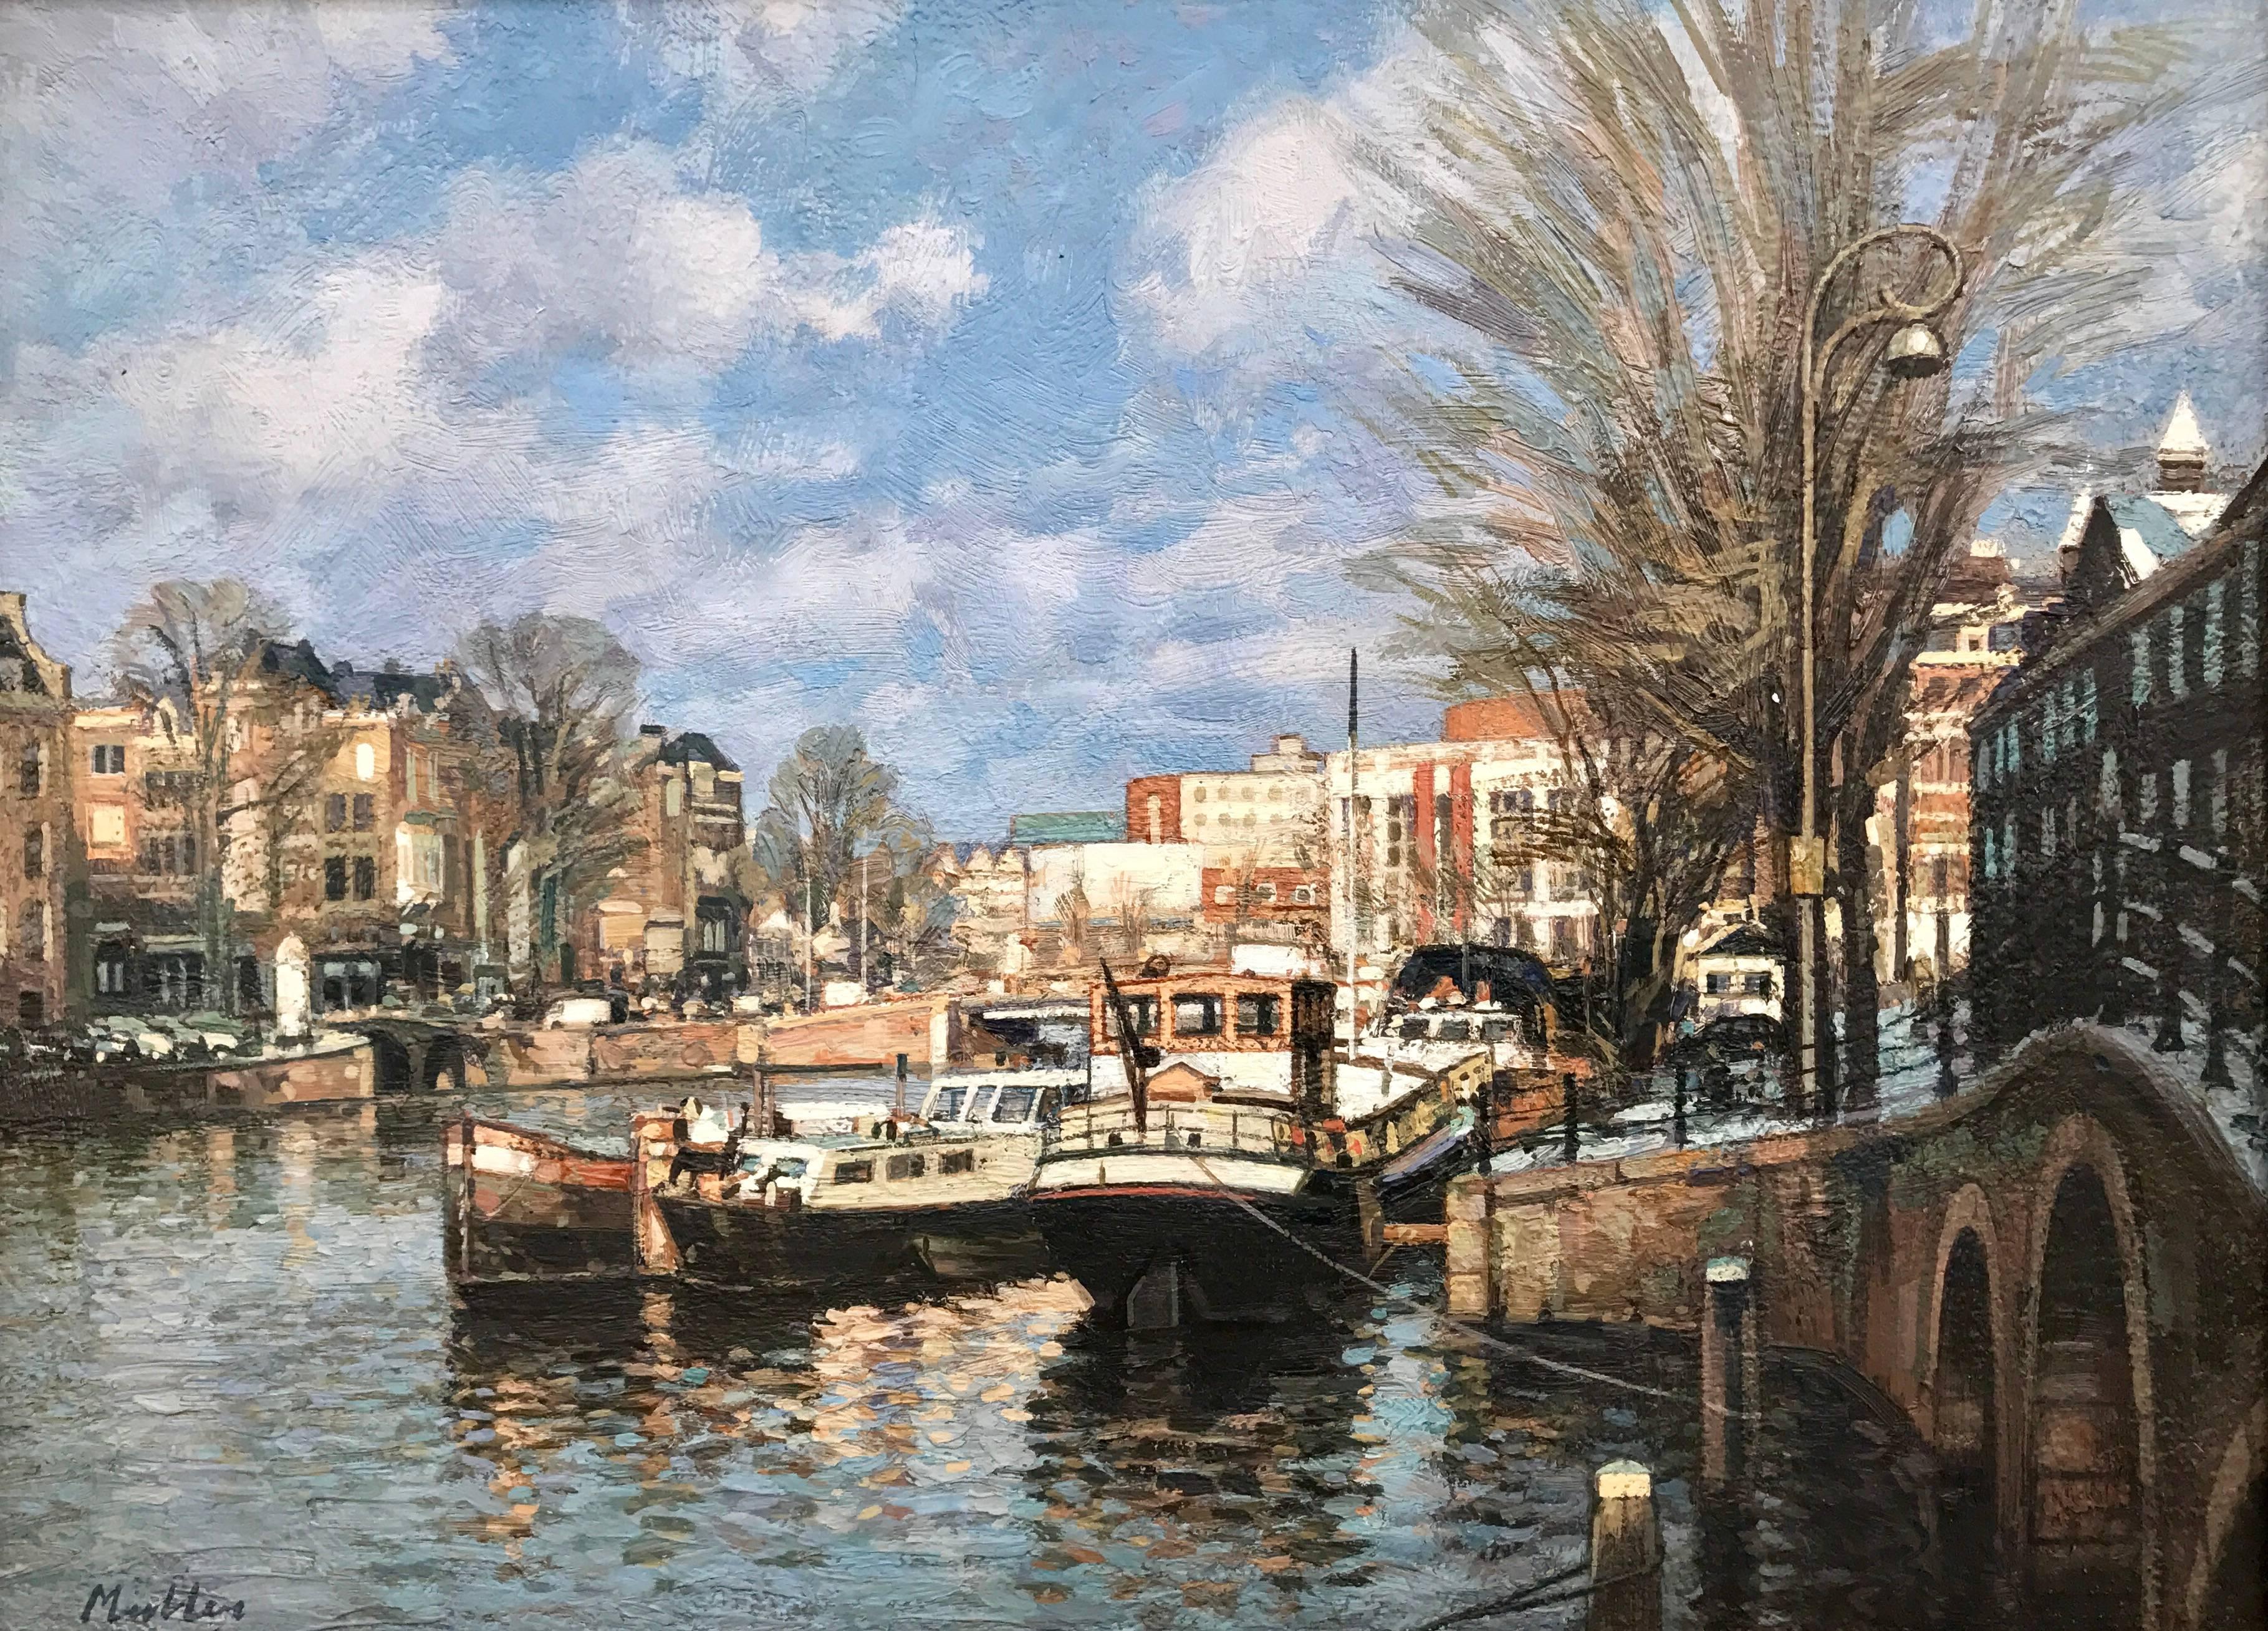 Cees Muller Landscape Painting - Oil Painting of Amsterdam Canal by 20th Century Dutch Urban Landscape Artist